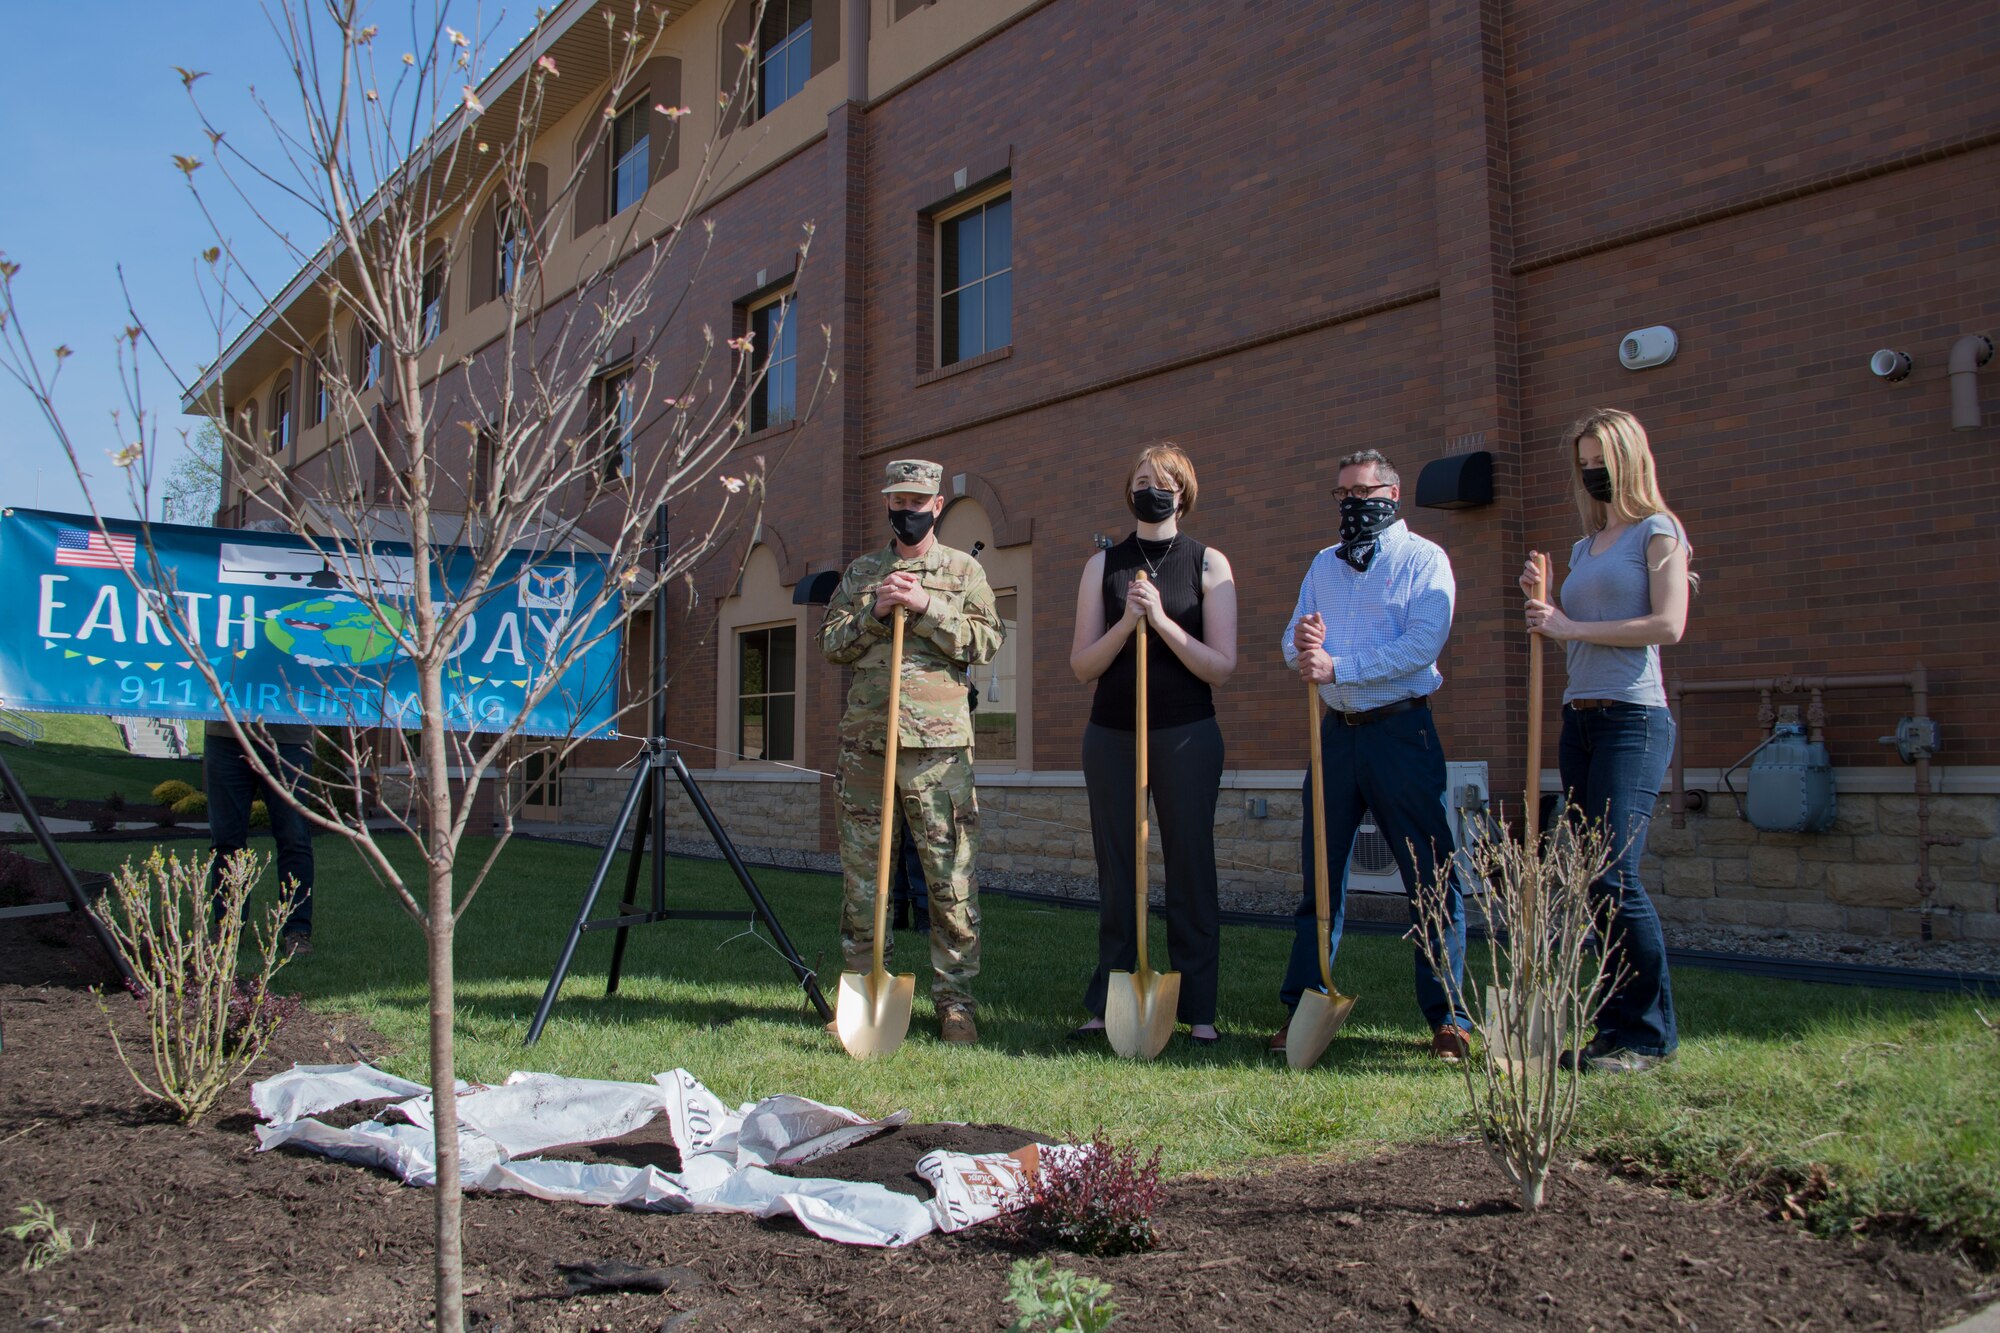 Col. John F. Robinson, commander of the 911th Airlift Wing, Marjorie Schurr, chief of the 911th AW Public Affairs, Charlie Krisfalusi, real property maintenance manager with EAST Operations and Maintenance, and Allison Yeckel, environmental engineer with the 911th Civil Engineering, participate in a tree planting ceremony at the Pittsburgh International Airport Air Reserve Station, Pennsylvania, April 27, 2021.